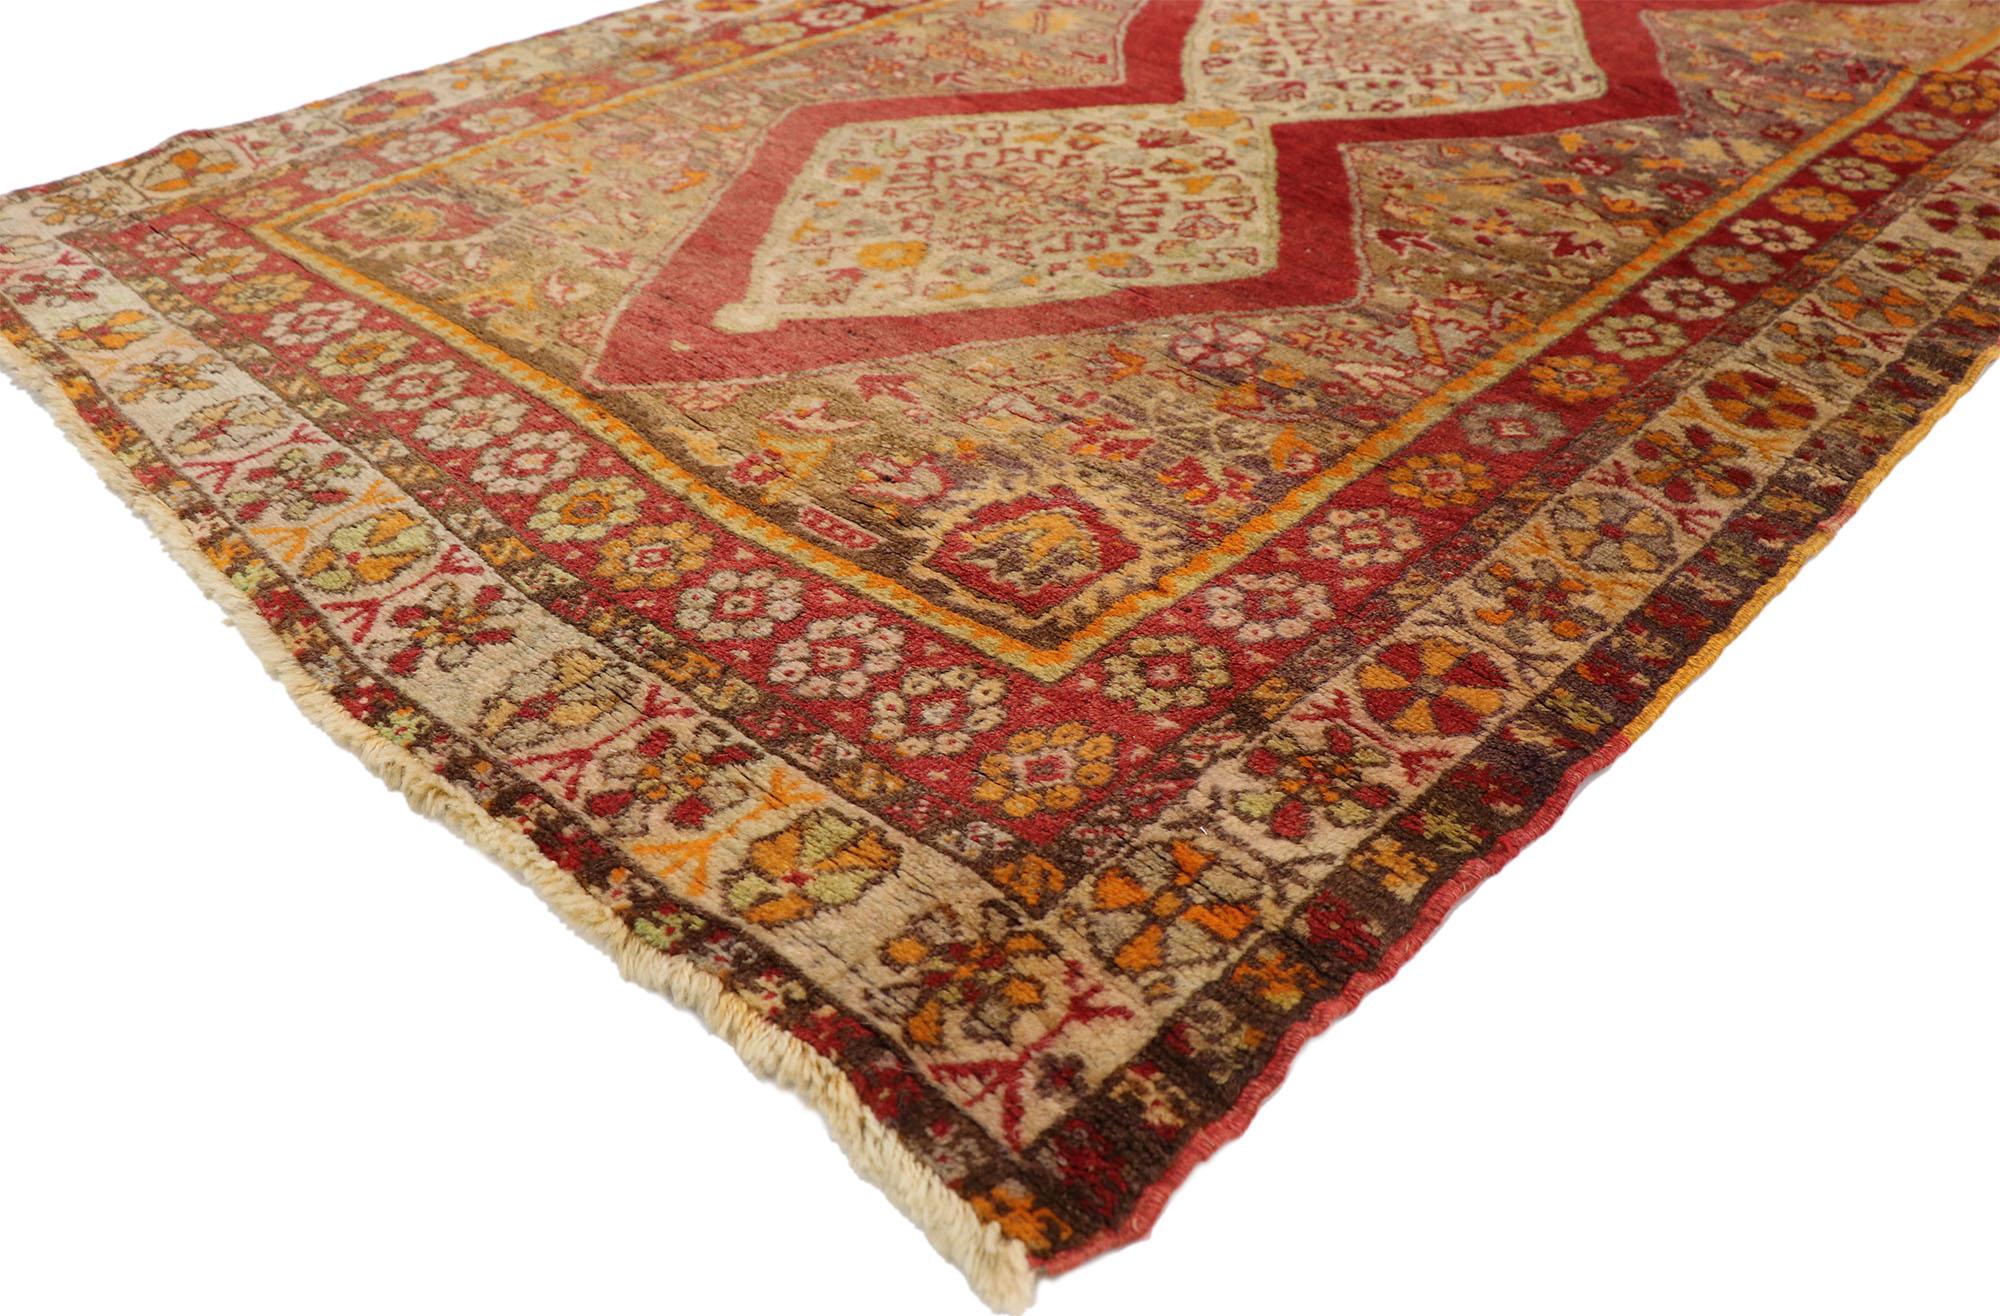 50364, antique Turkish Sivas runner with Modern Northwestern style. With its luminous warm hues and beguiling beauty, this hand-knotted wool antique Turkish Sivas runner is immersed in Anatolian history. Intensely outlined in red, the center